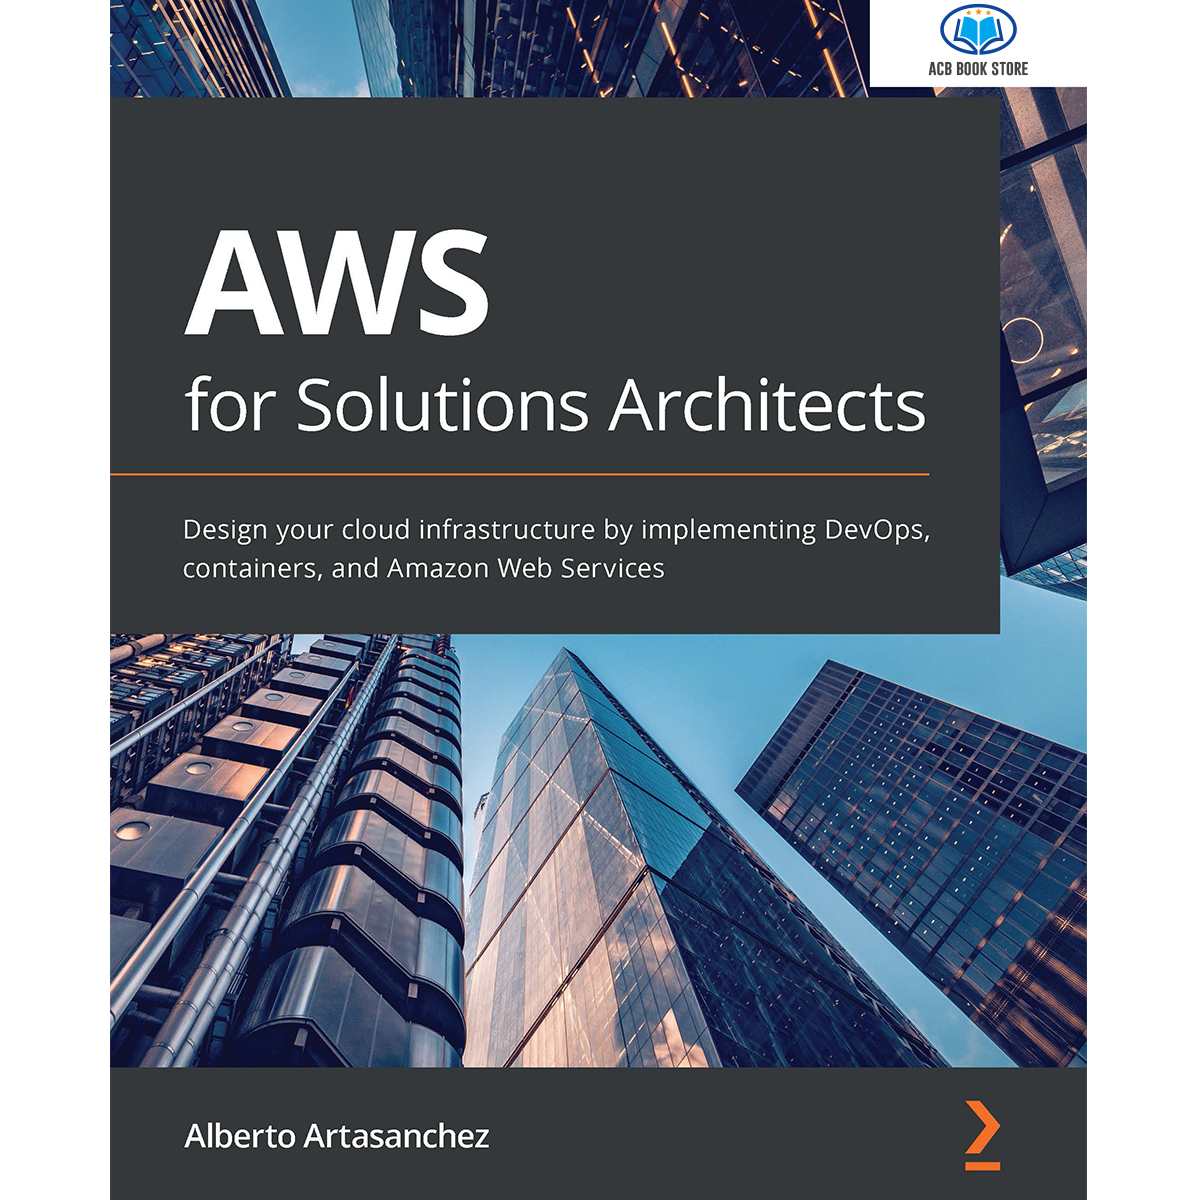 Sách AWS for Solutions Architects - ACB Bookstore